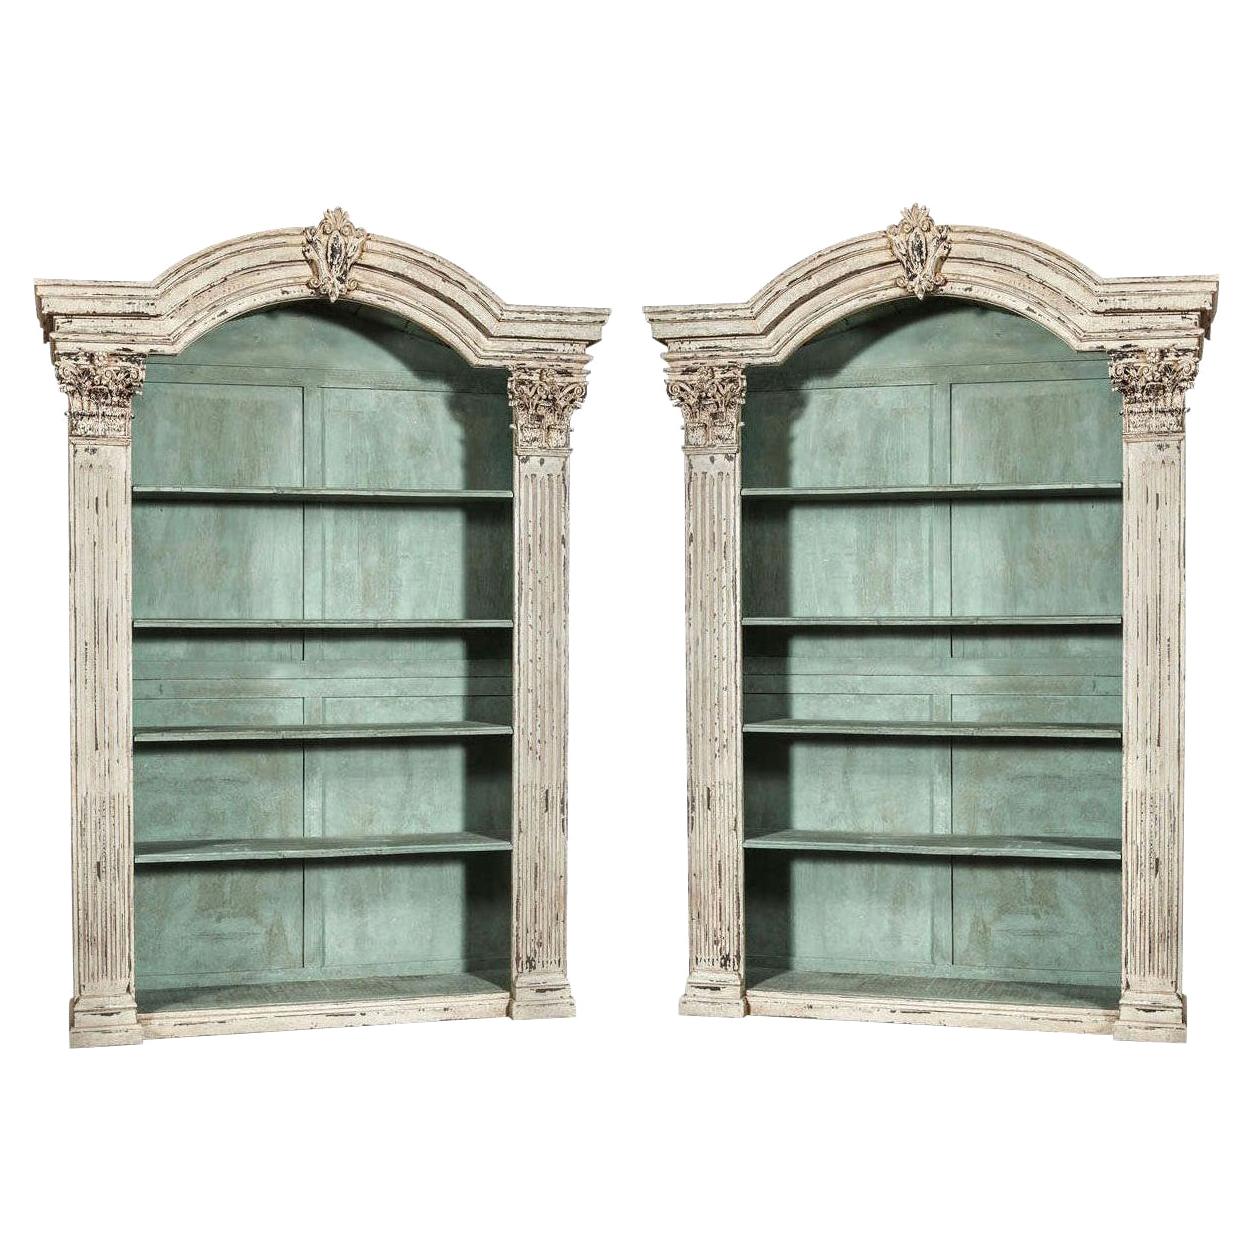 Pair of Louis XIV French Carved Painted Open Bookcases Made with Old Elements